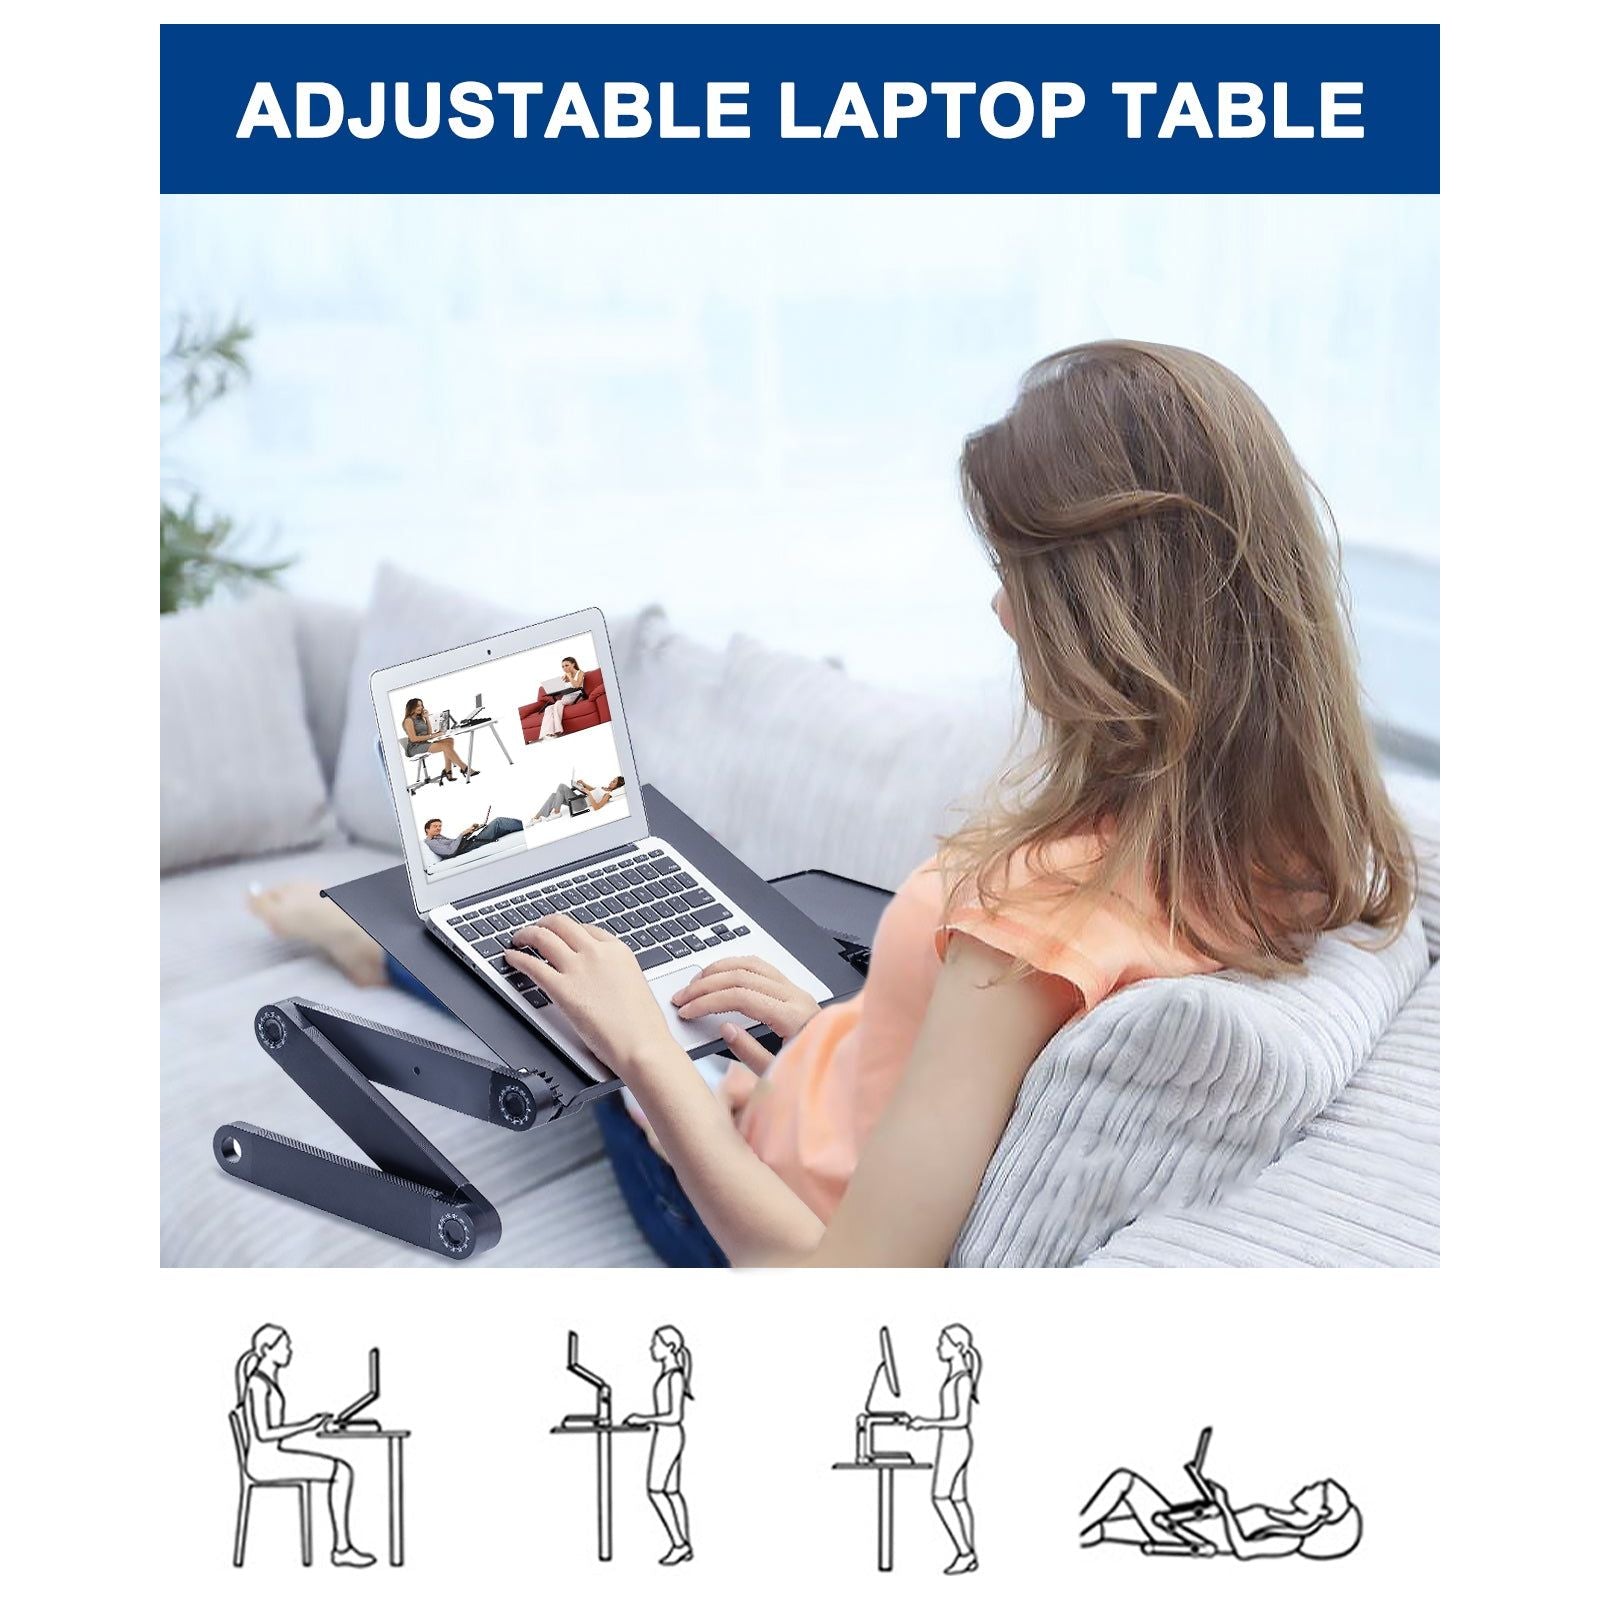 Adjustable Laptop Stand, RAINBEAN Laptop Desk with 2 CPU Cooling USB Fans for Bed Aluminum Lap Workstation Desk with Mouse Pad, Foldable Cook Book Stand Notebook Holder Sofa,Amazon Banned - New Star Living